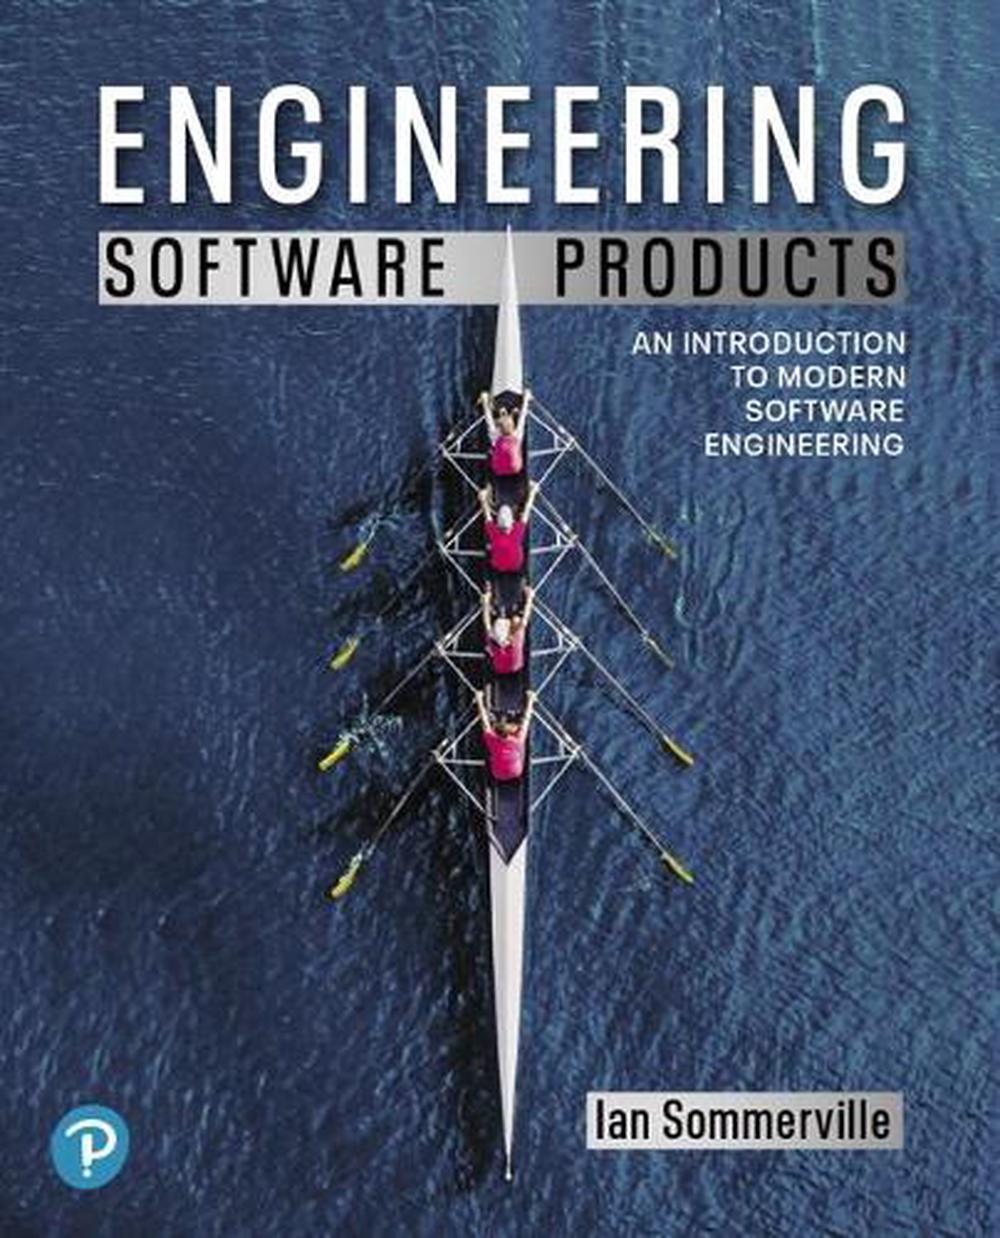 Engineering Software Products by Ian Sommerville (English) Paperback